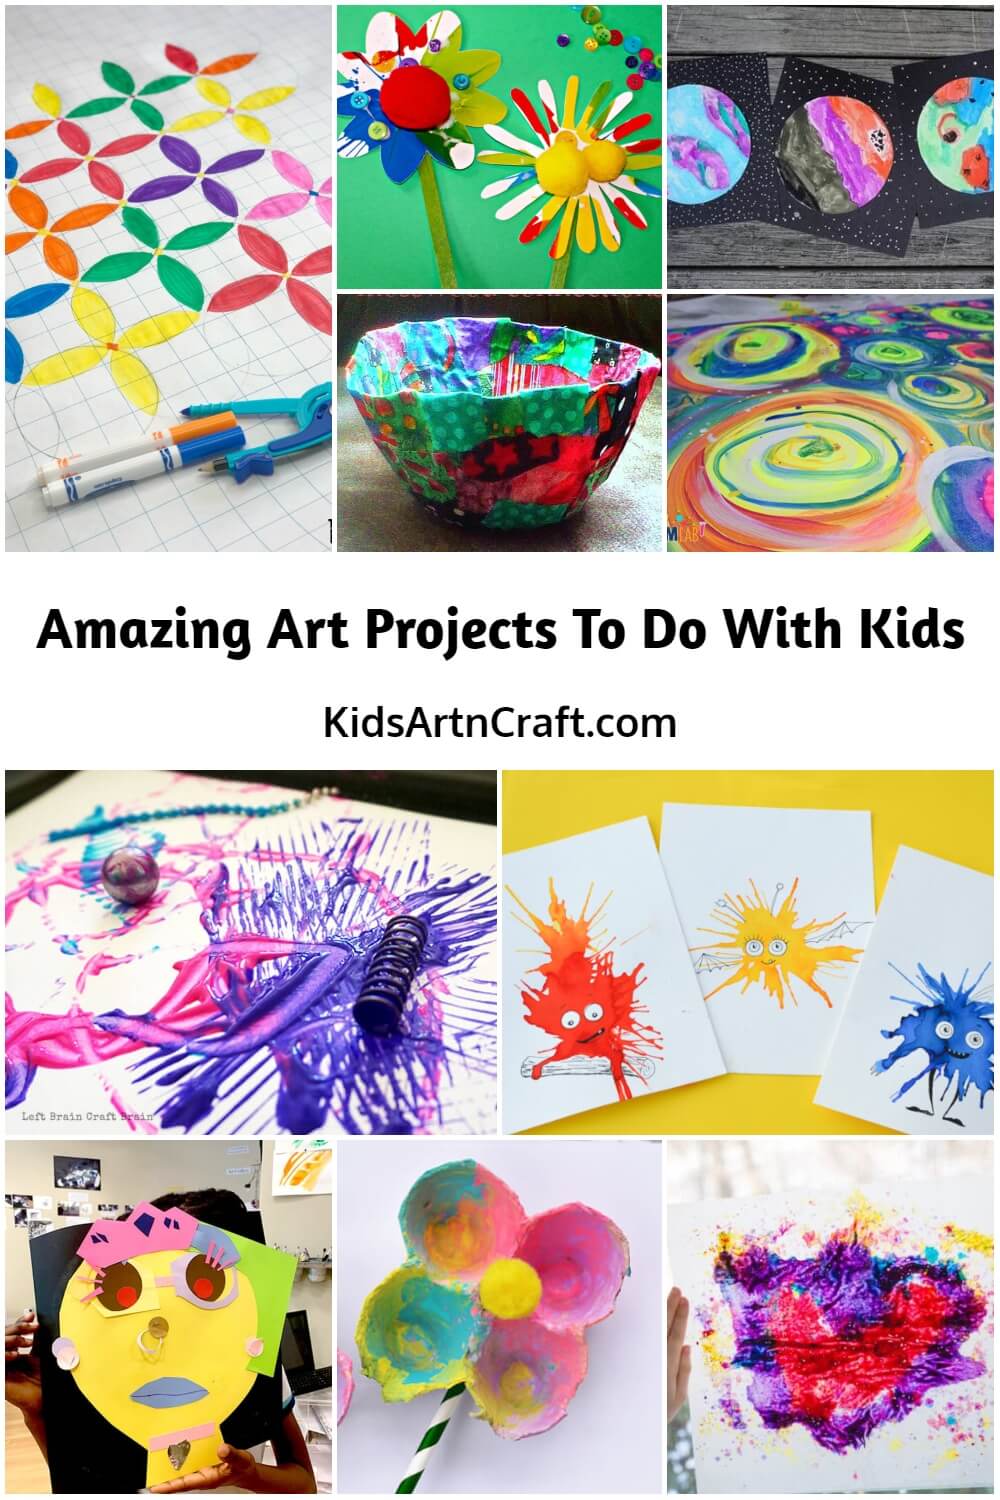 Amazing Art Projects To Do with Kids